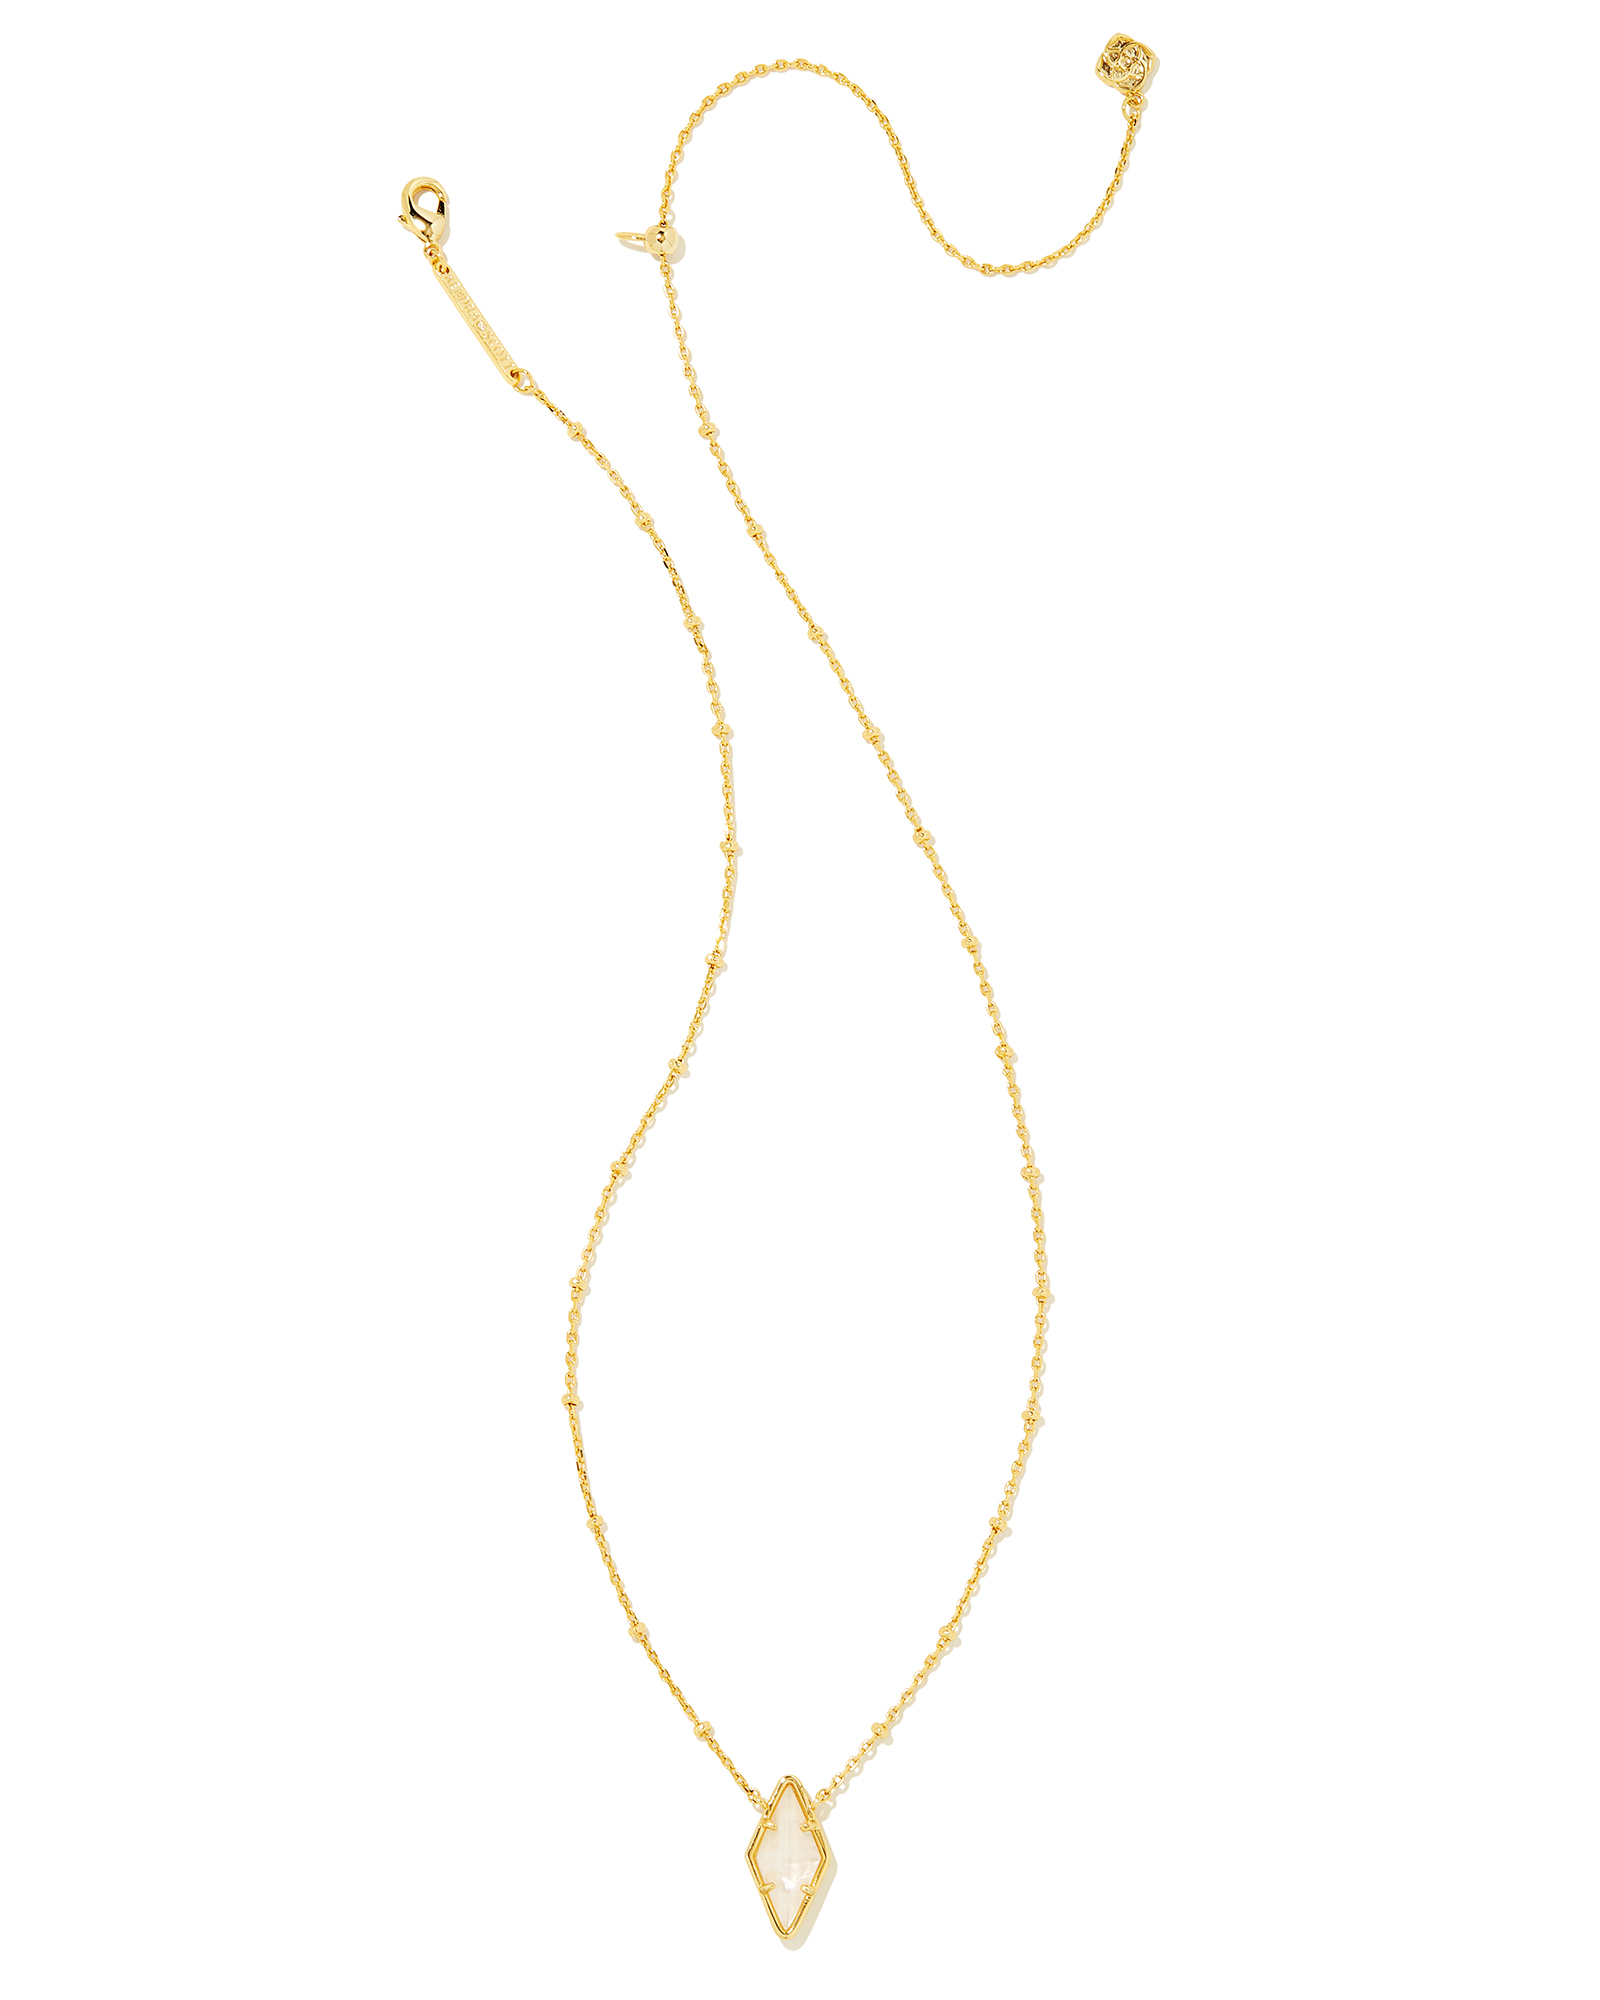 Kinsley Gold Short Pendant Necklace in Ivory Mother-of-Pearl | Kendra Scott